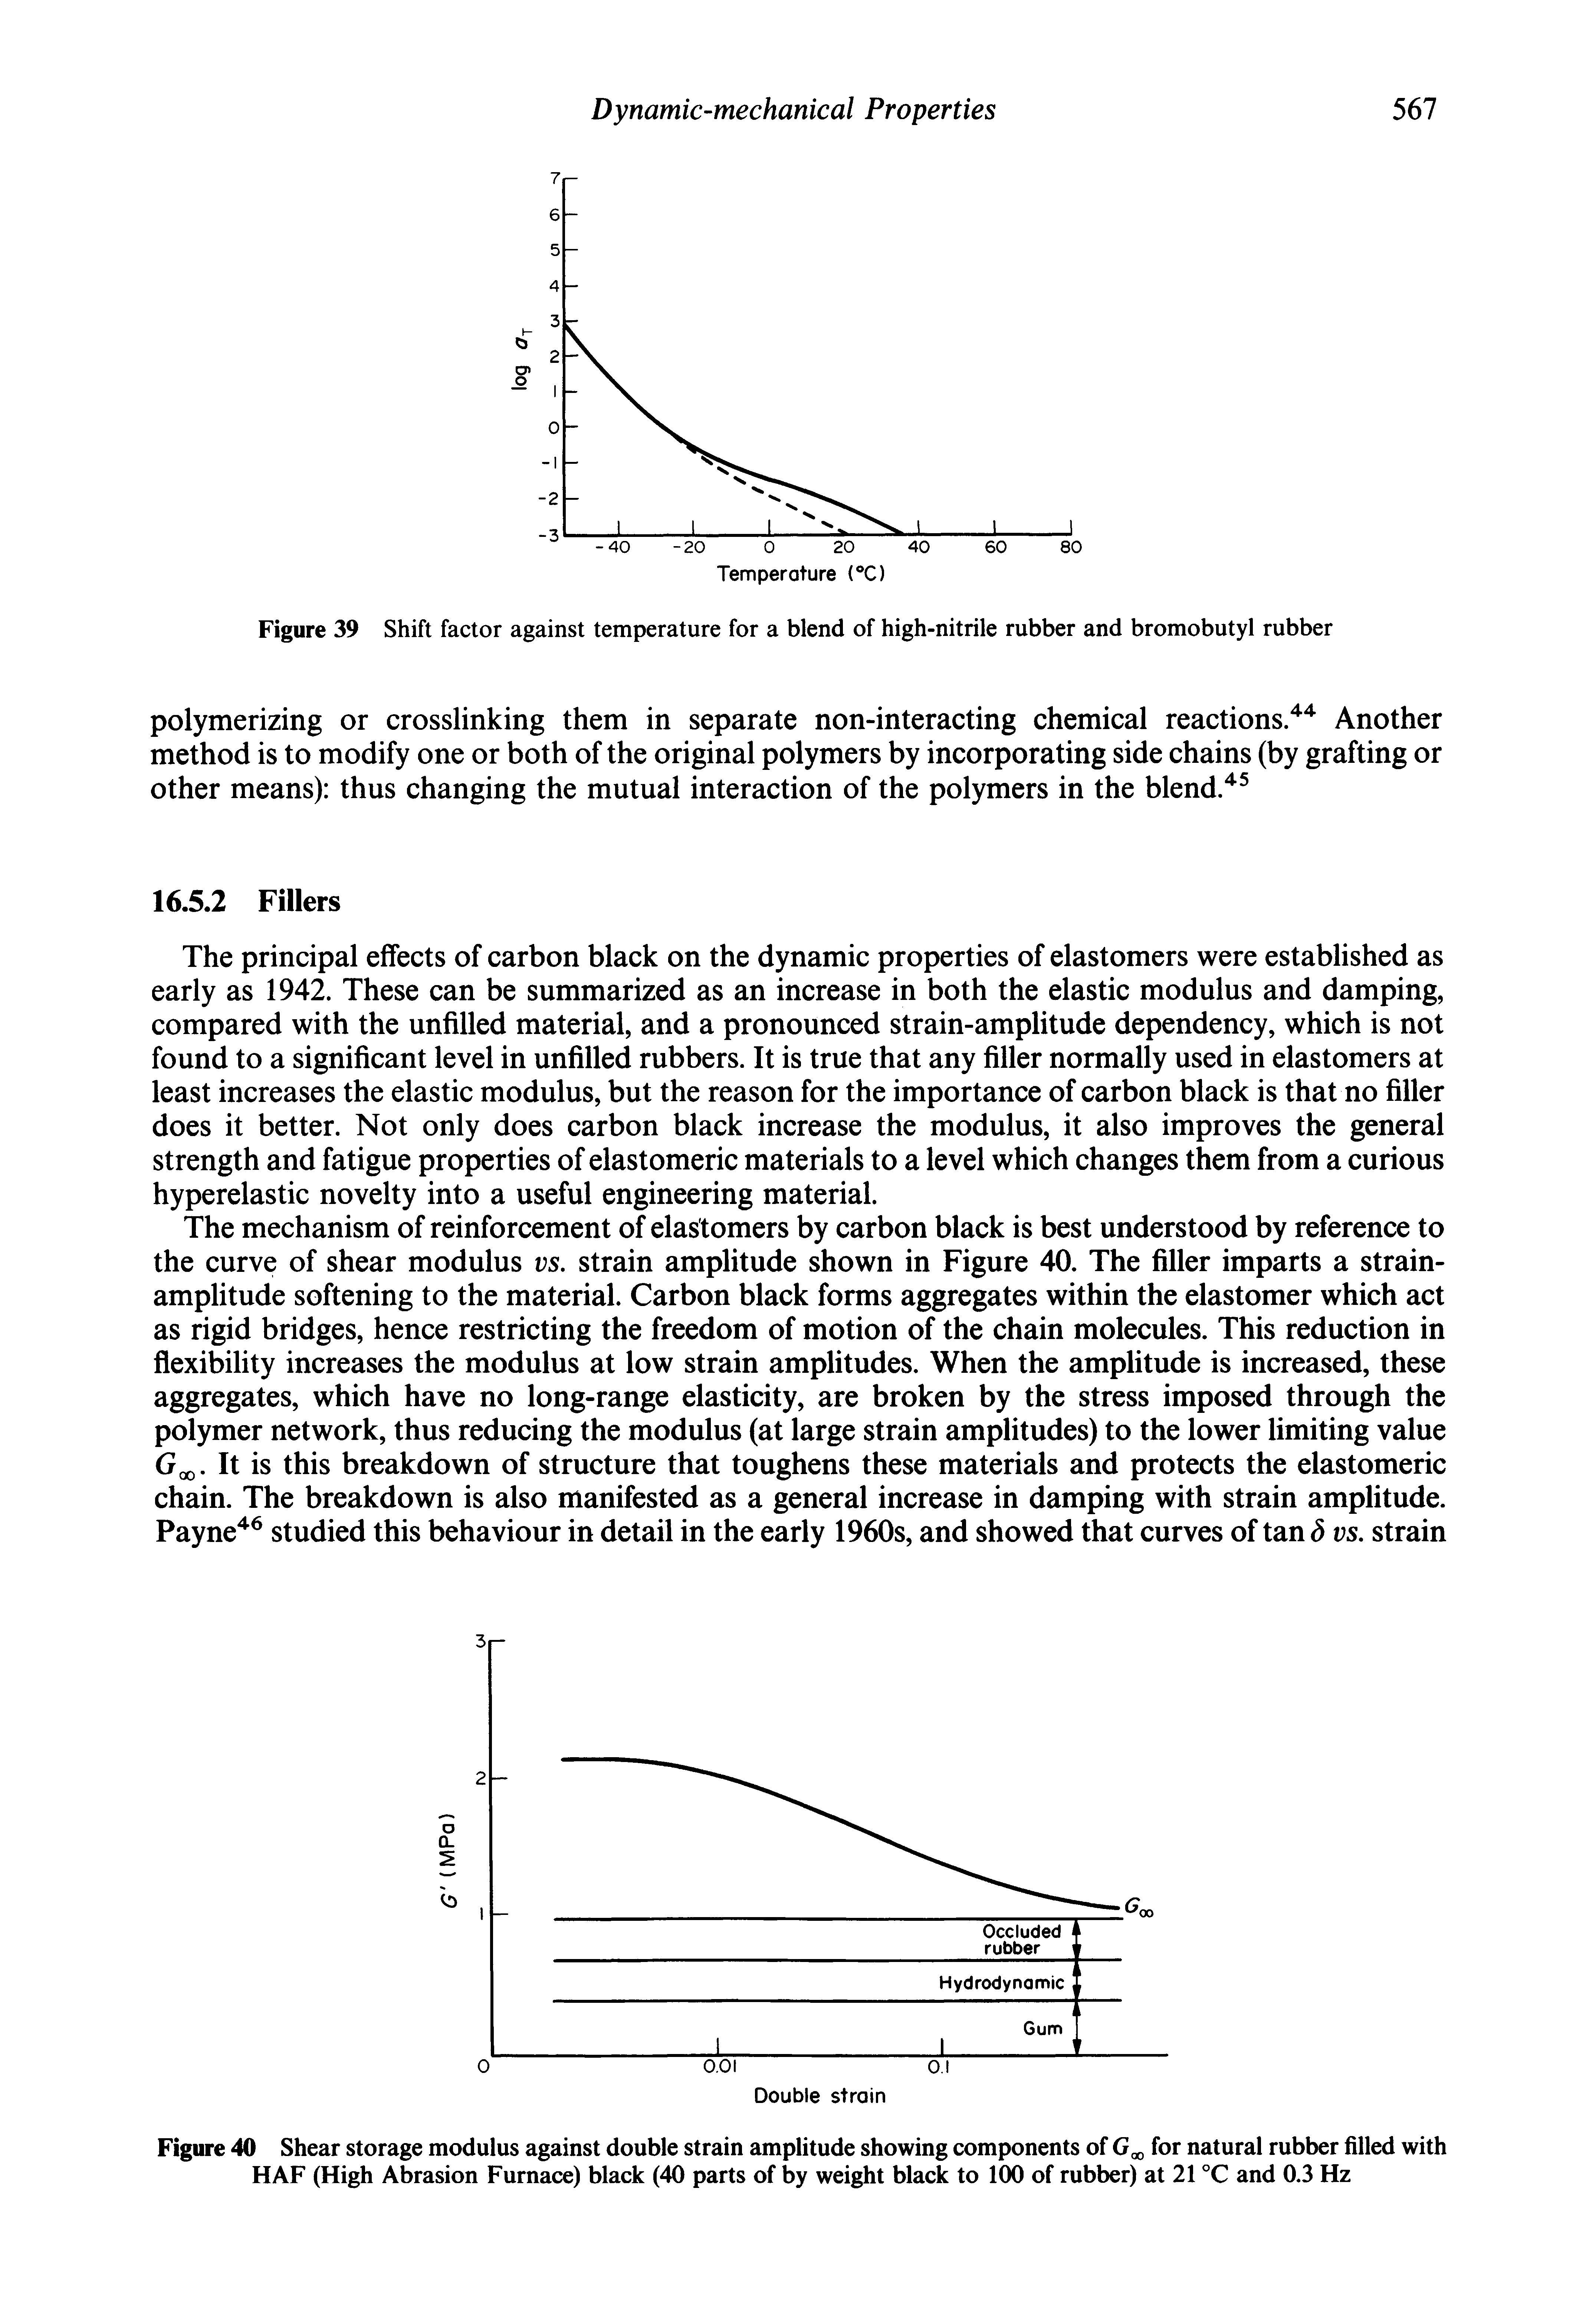 Figure 40 Shear storage modulus against double strain amplitude showing components of for natural rubber filled with HAF (High Abrasion Furnace) black (40 parts of by weight black to 1(X) of rubber) at 21 °C and 0.3 Hz...